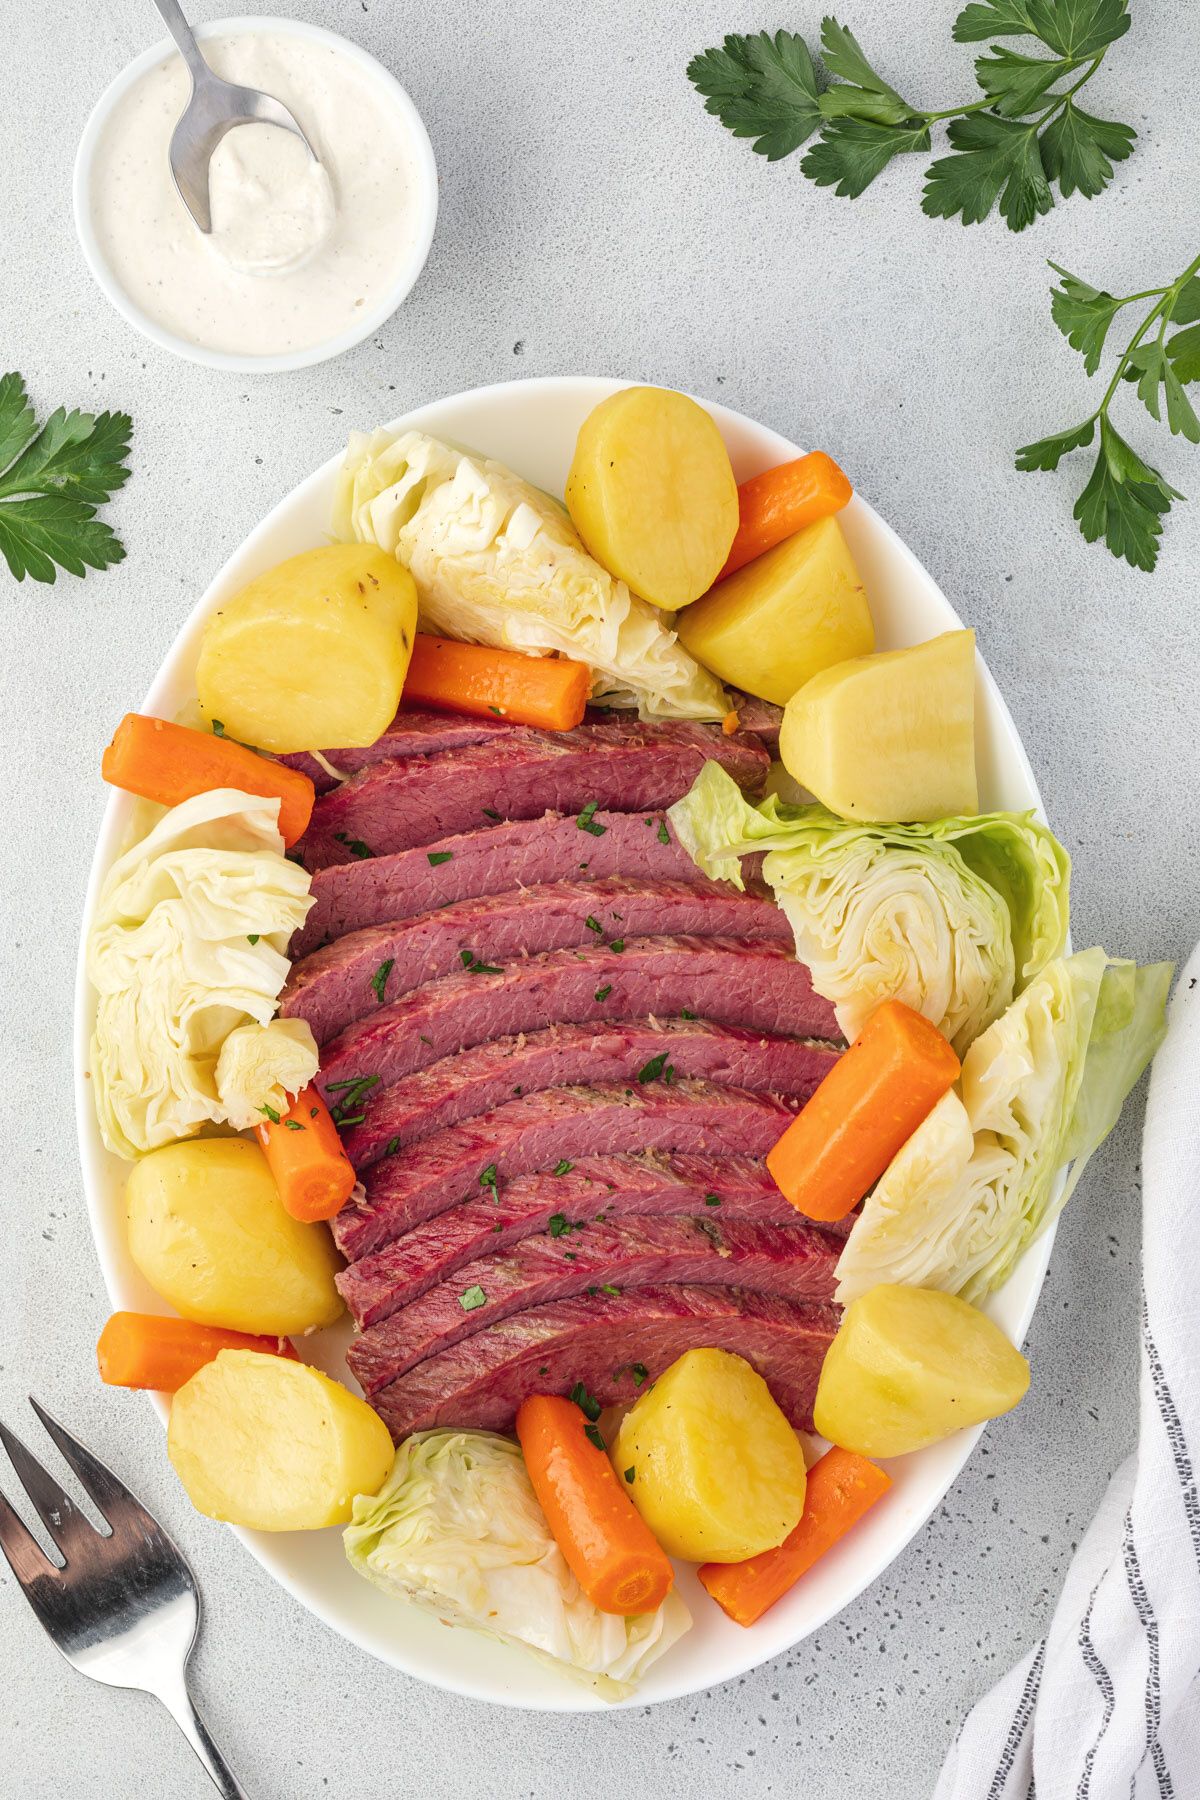 Overhead of a platter of corned beef with veggies surrounding it, parsley scattered, and a bowl of creamy white mustard sauce.